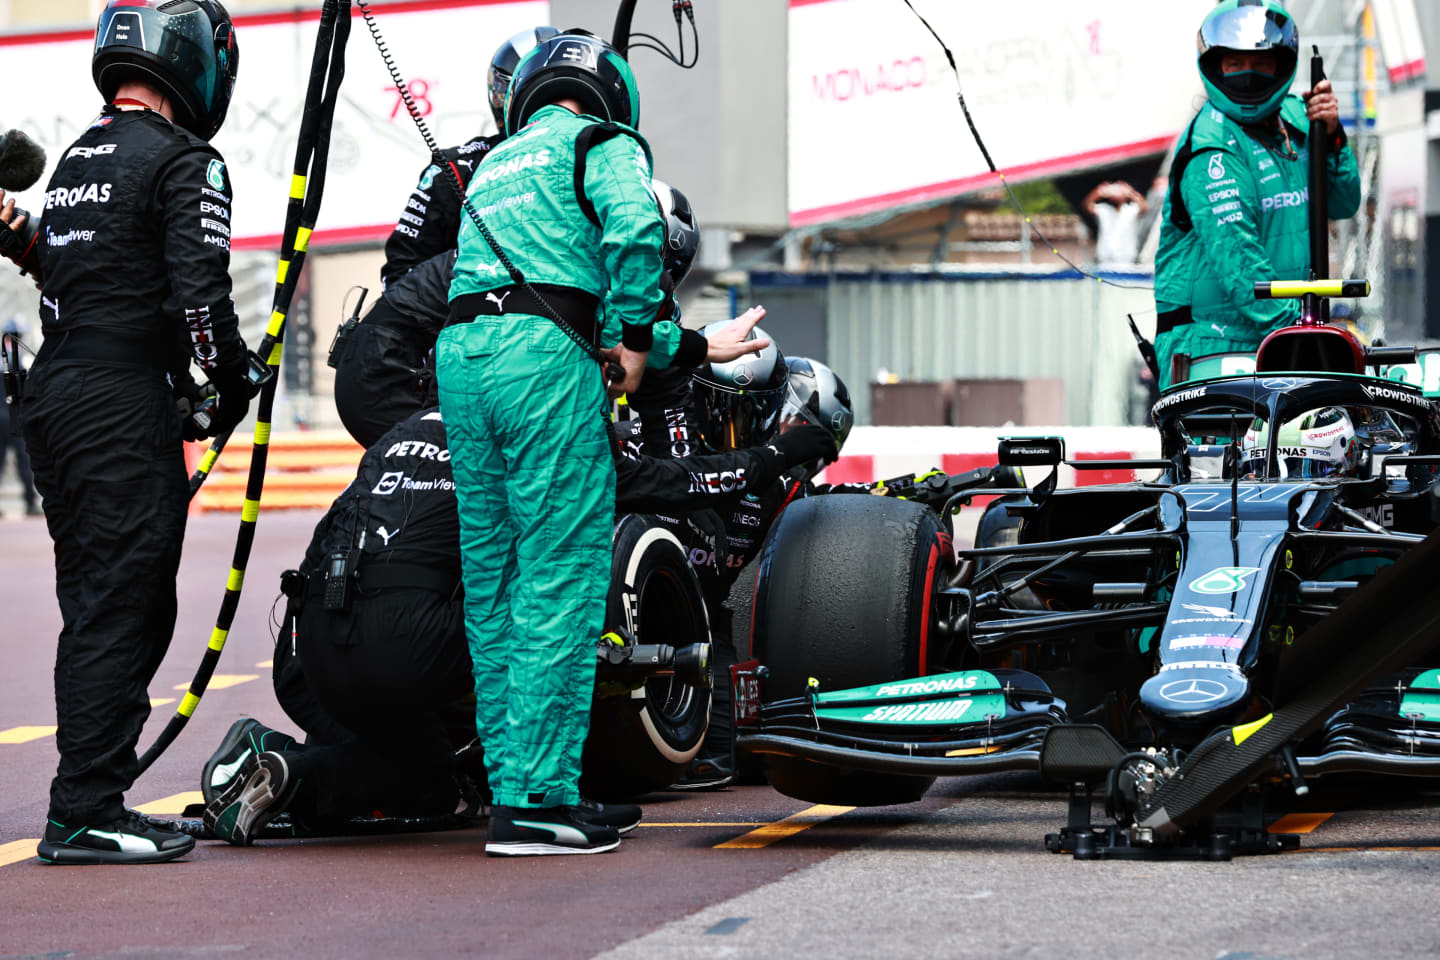 MONTE-CARLO, MONACO - MAY 23: Valtteri Bottas of Finland driving the (77) Mercedes AMG Petronas F1 Team Mercedes W12 makes a pitstop but his front right wheel is stuck on his car leading to his retirement from the race during the F1 Grand Prix of Monaco at Circuit de Monaco on May 23, 2021 in Monte-Carlo, Monaco. (Photo by Mark Thompson/Getty Images)